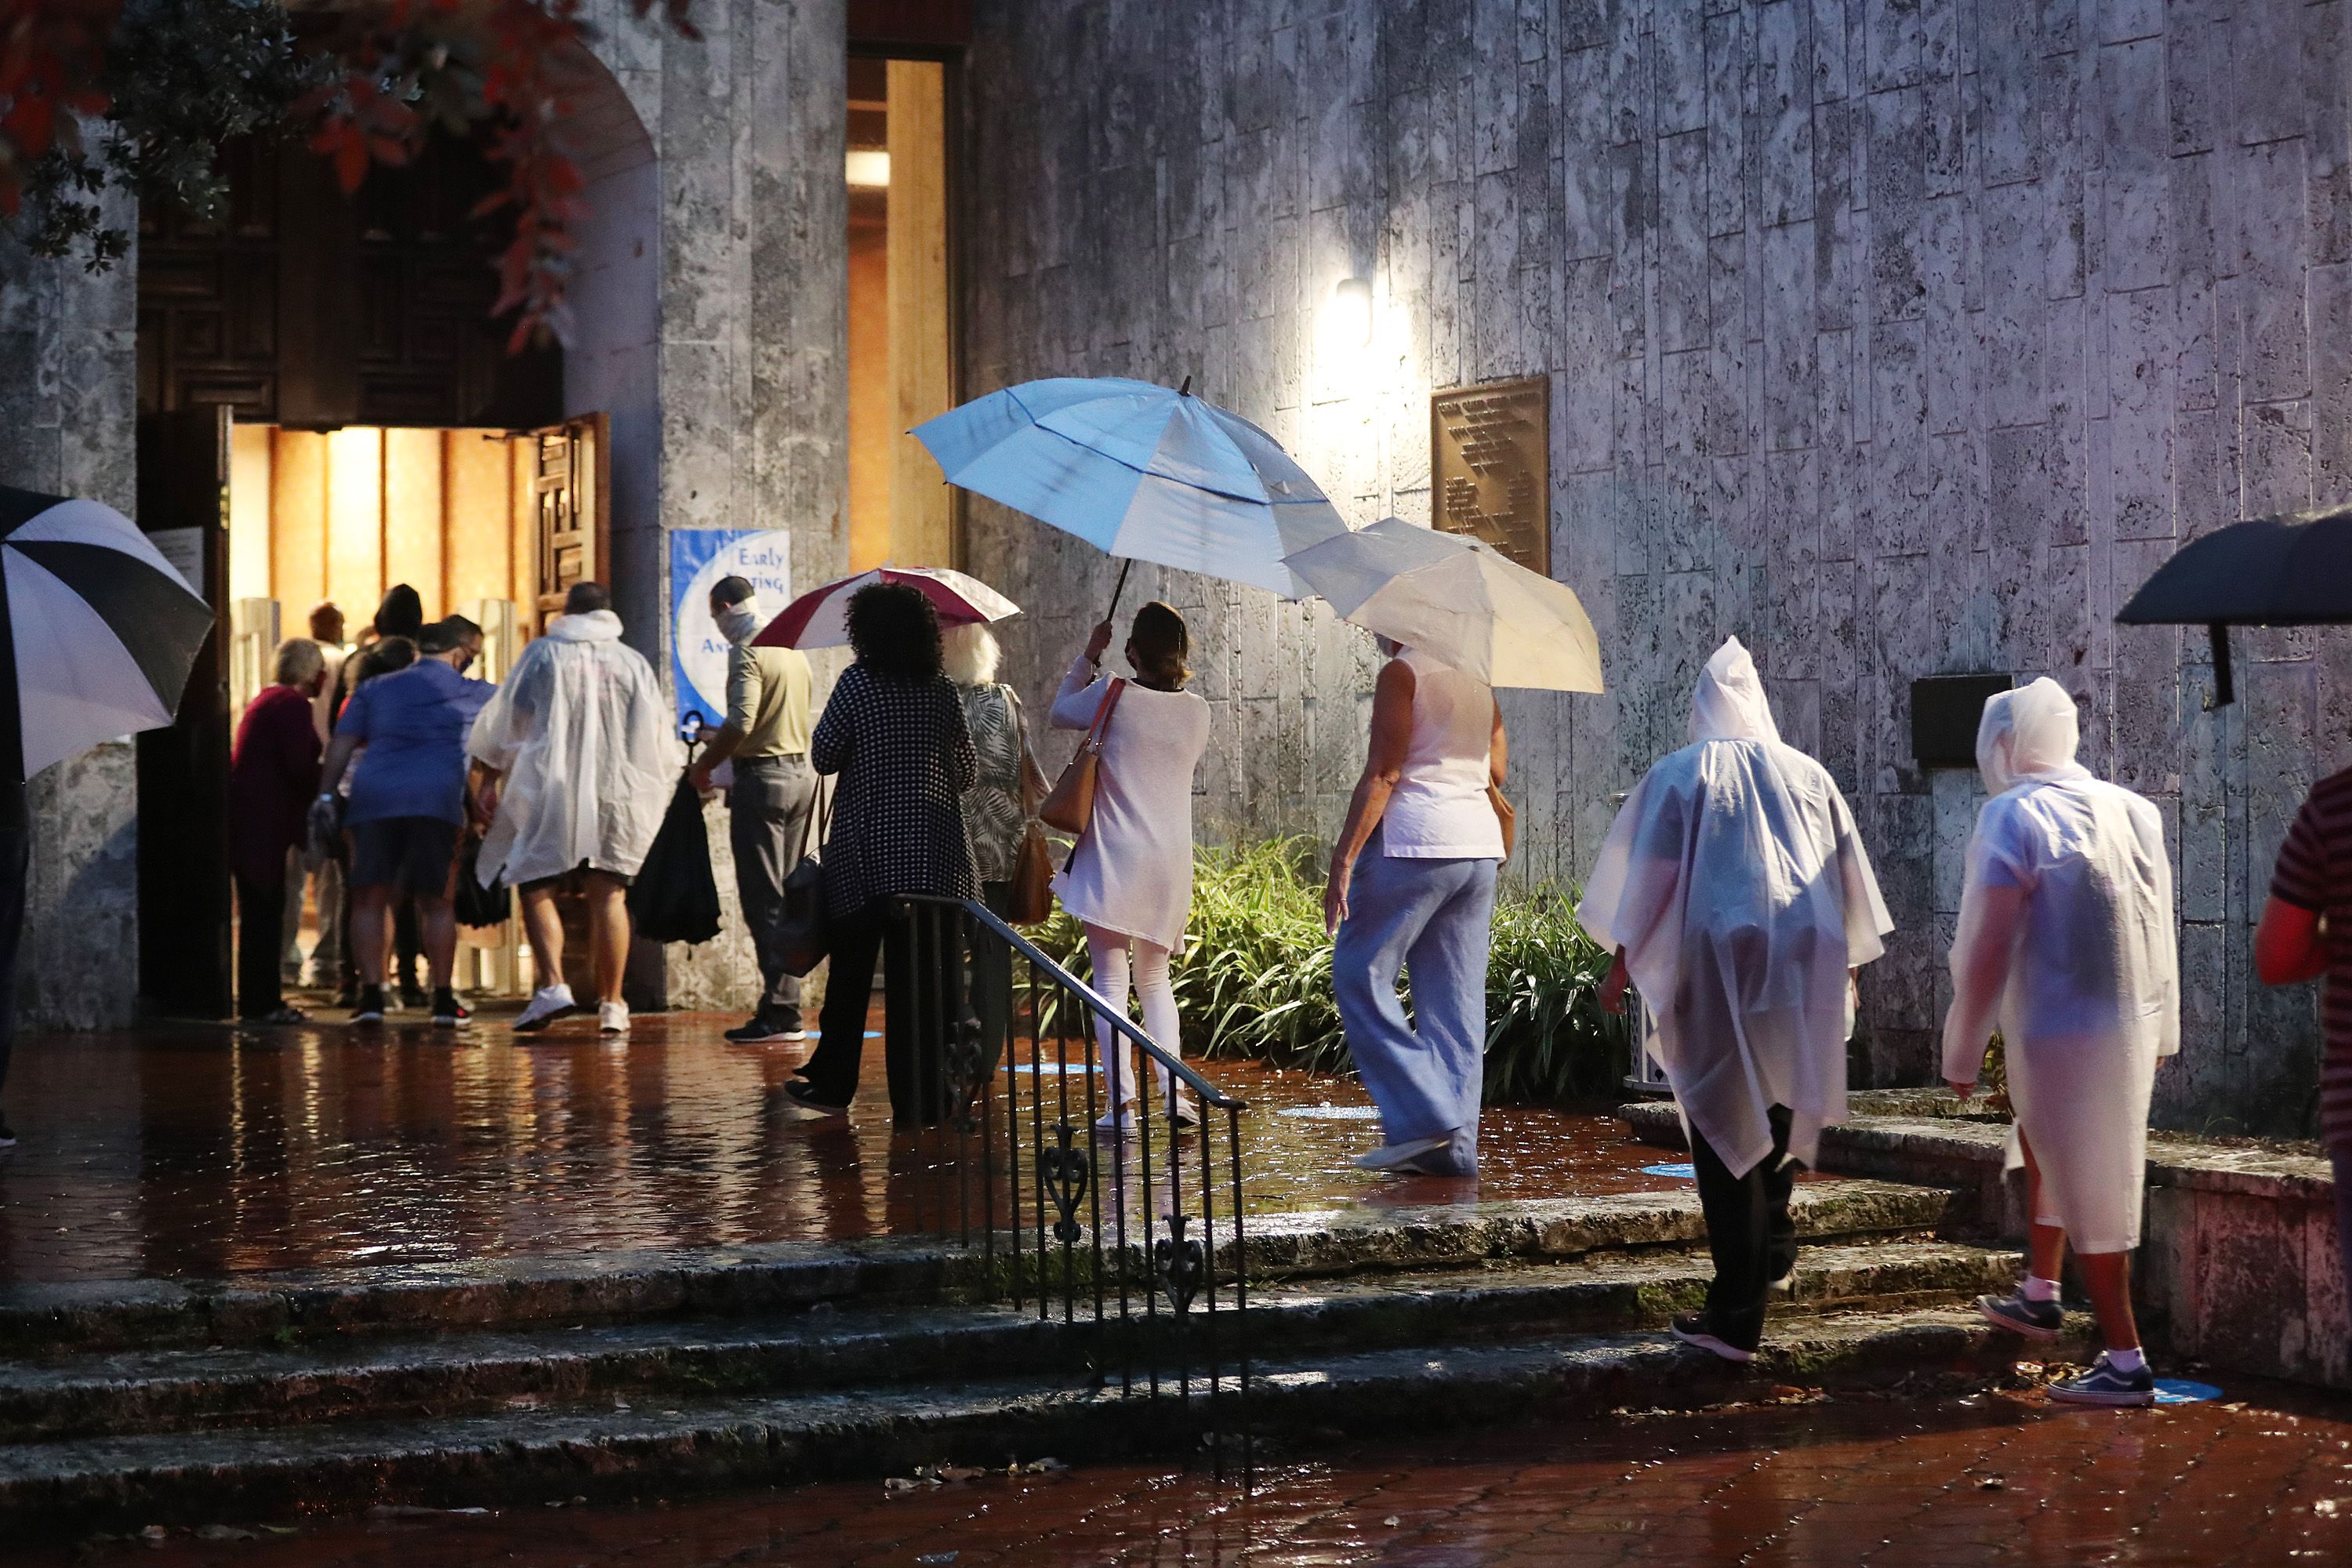 A line of people stand in the rain, wearing ponchos and holding umbrellas, to vote at night